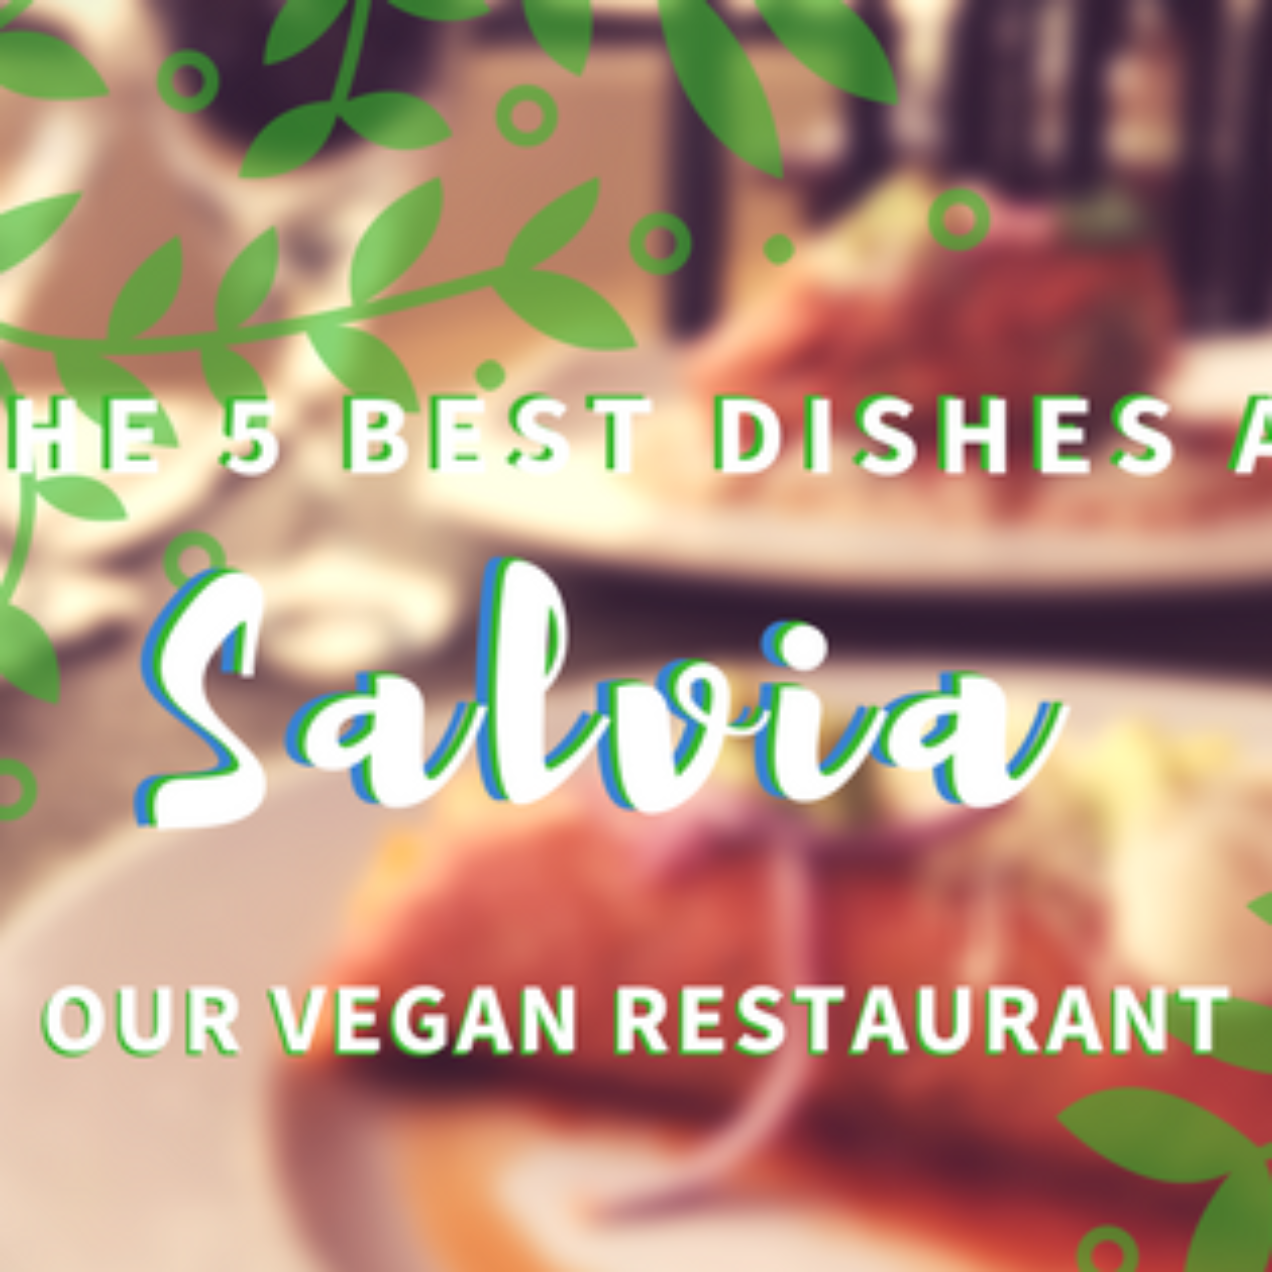 The 5 Best Dishes at Salvia, Our Vegan Restaurant